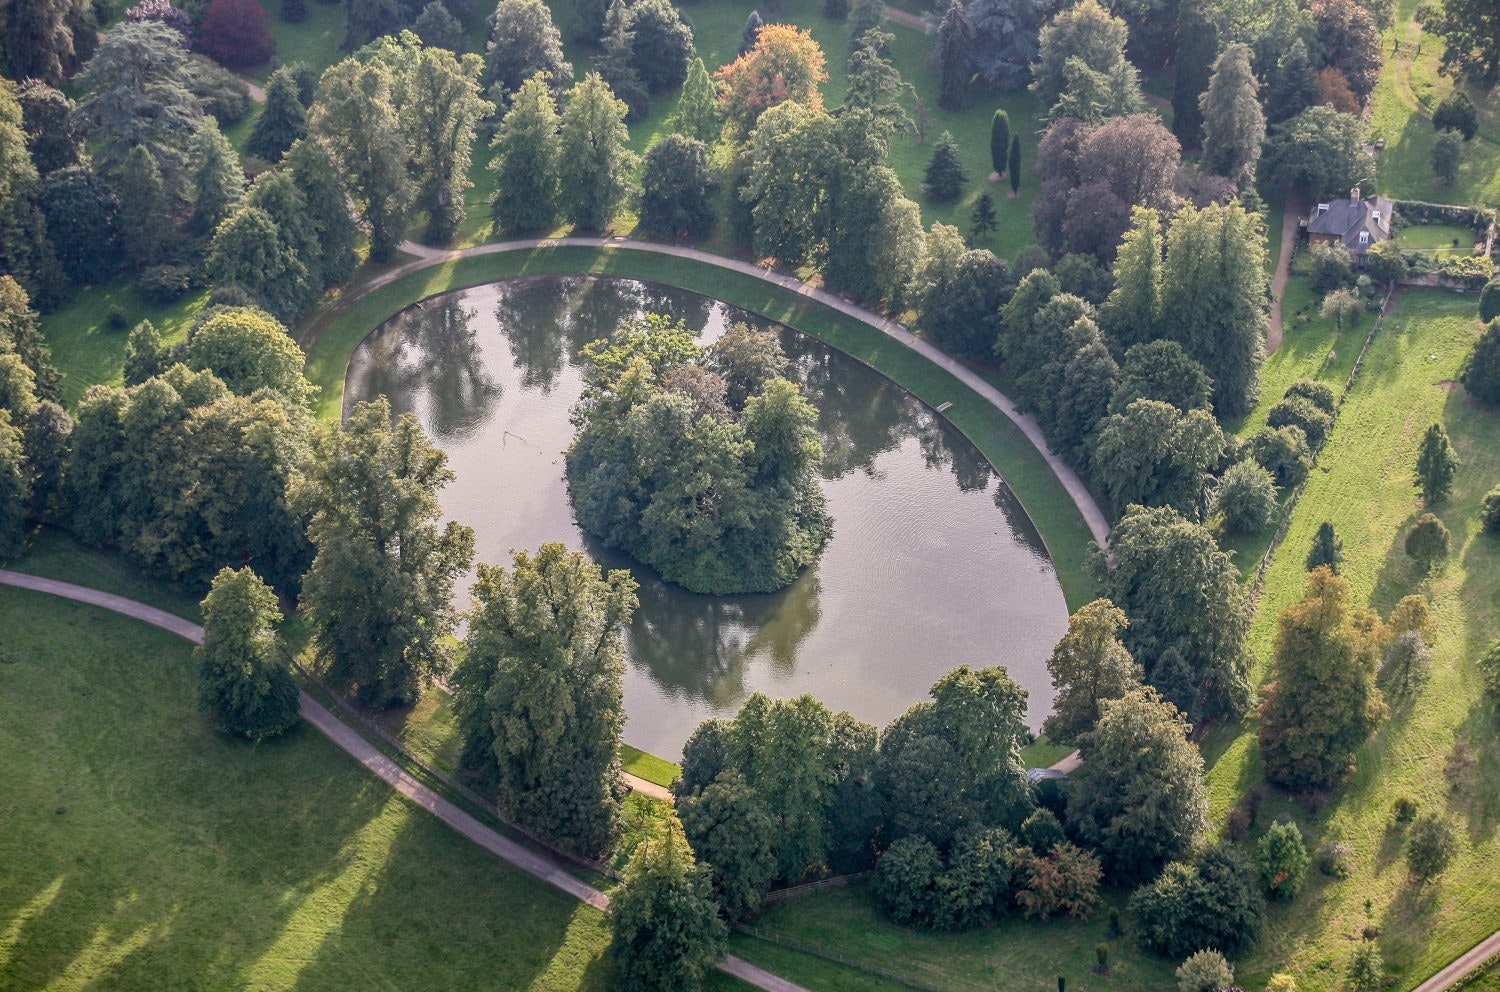 An aerial view of the Round Oval lake in Althorp. which is the burial site of Diana, Princess of Wales.